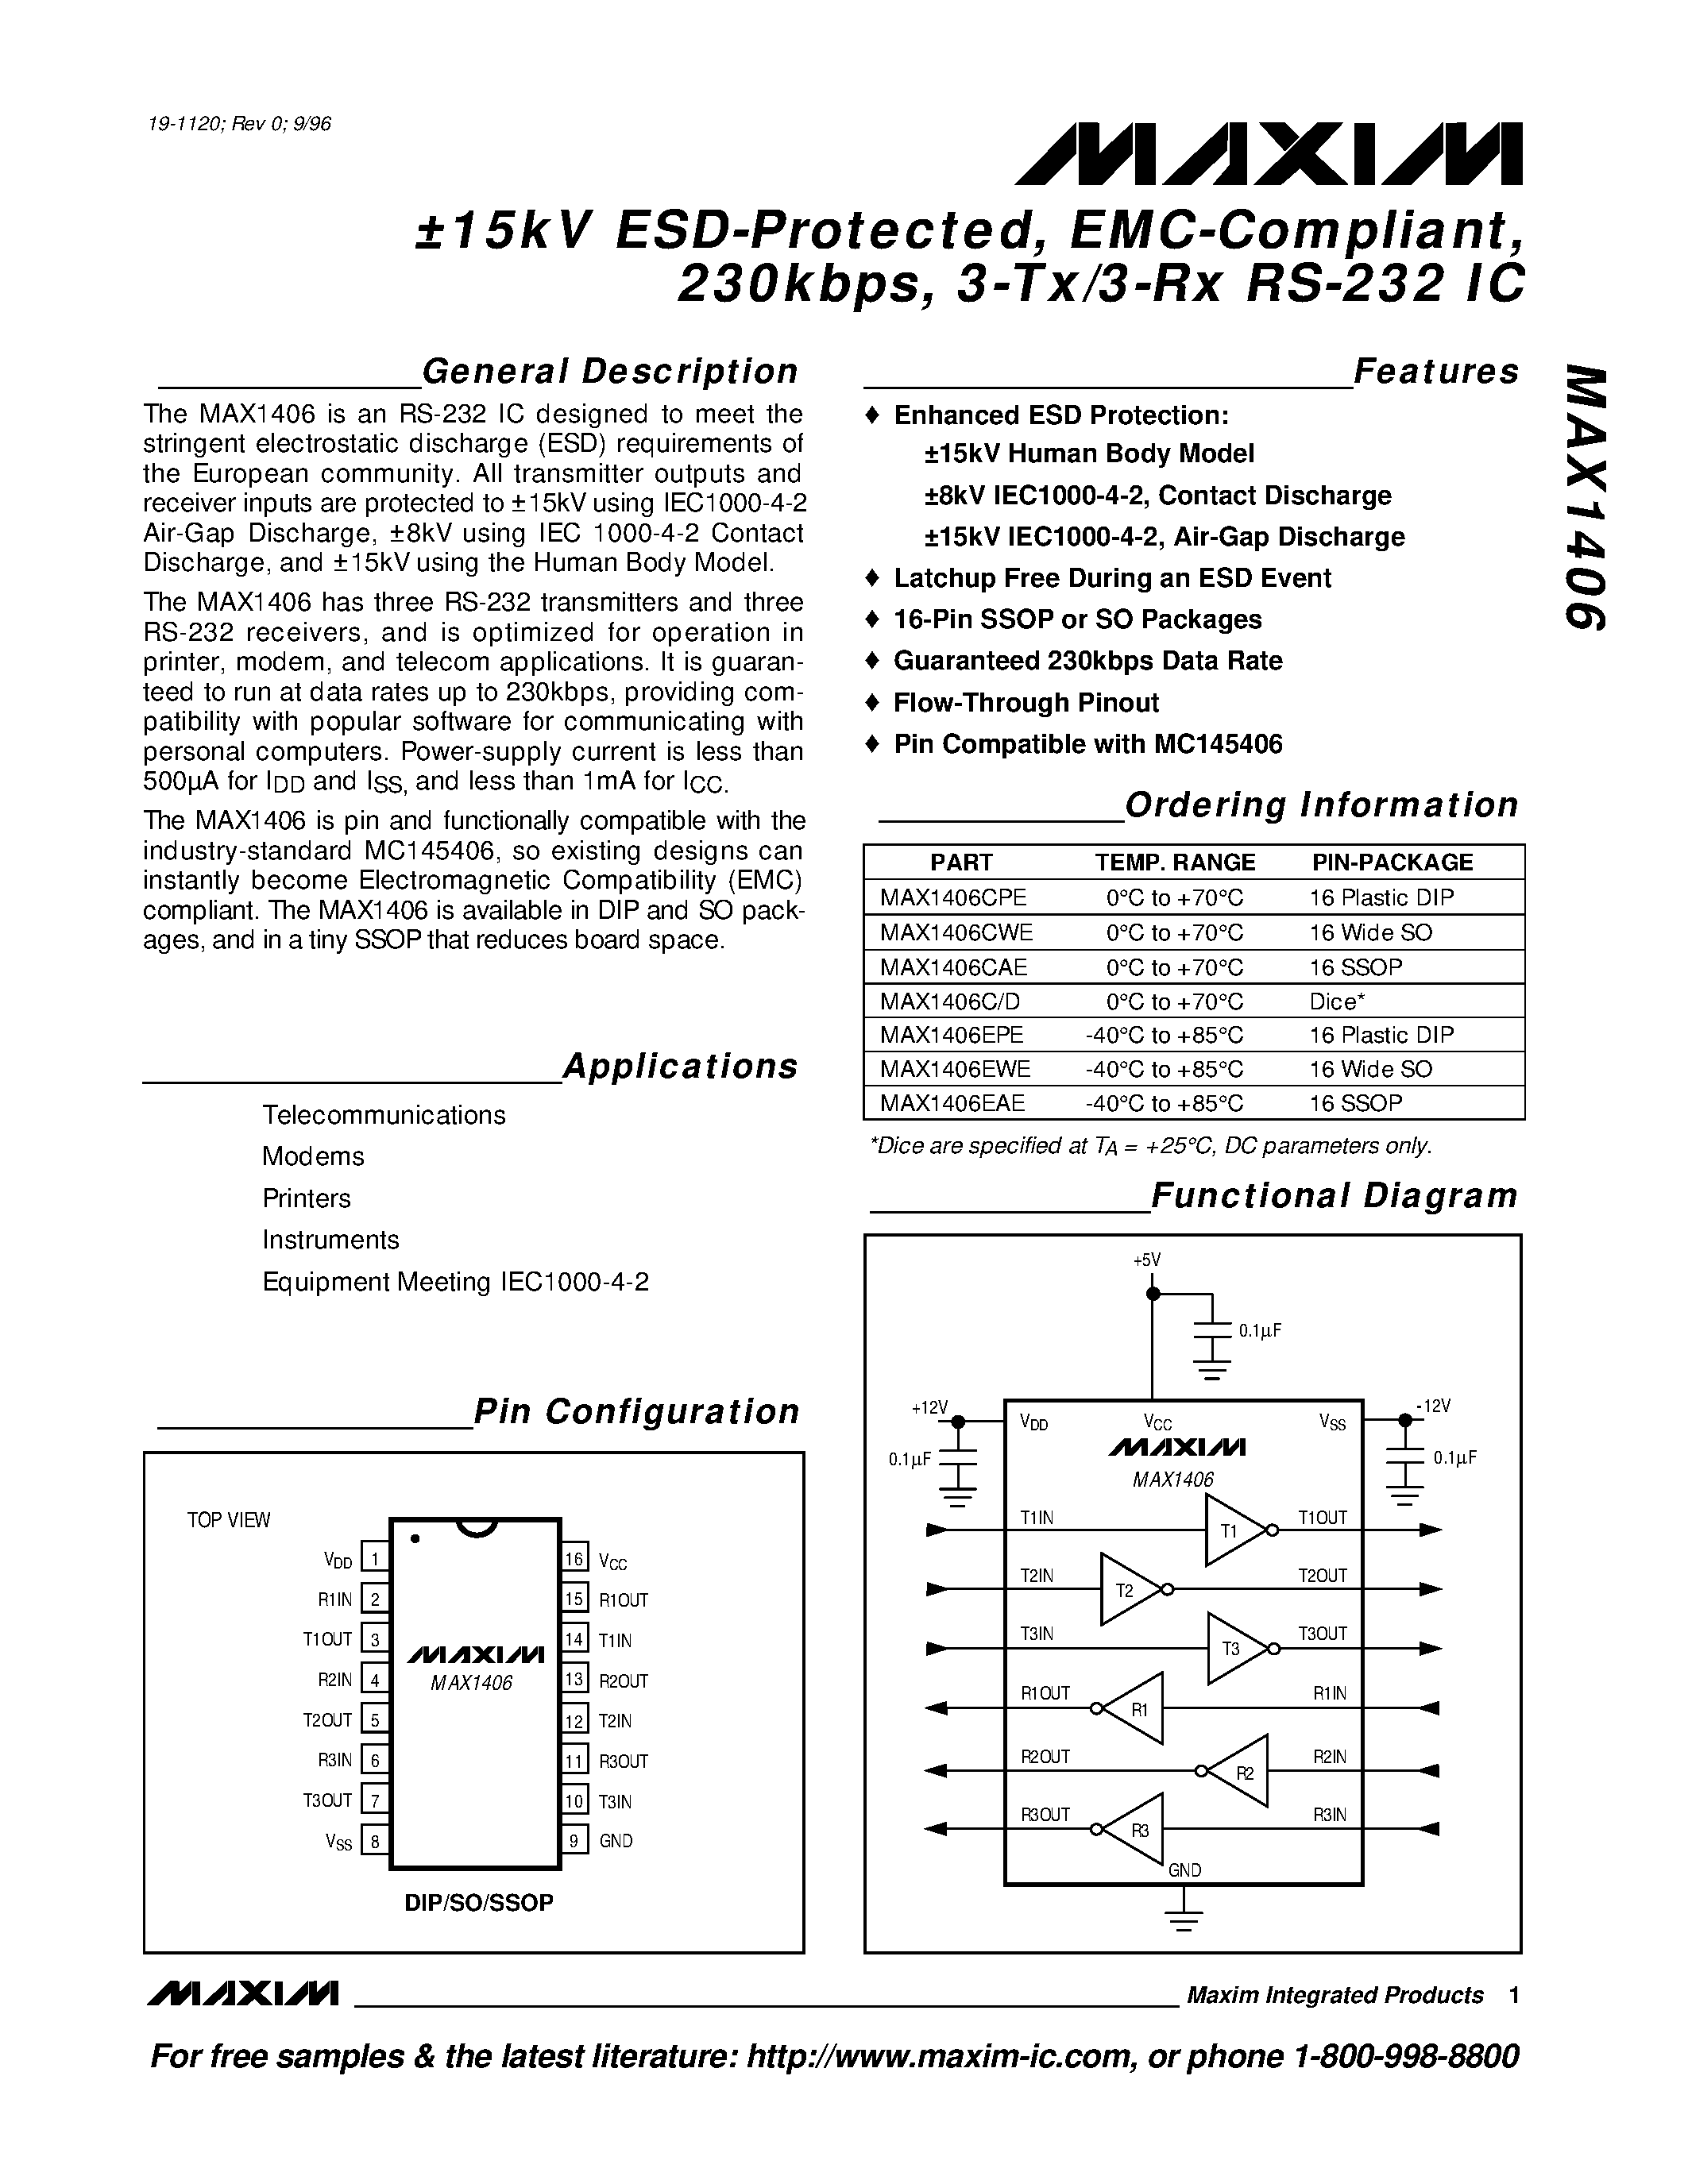 Datasheet MAX1406 - 15kV ESD-Protected / EMC-Compliant / 230kbps / 3-Tx/3-Rx RS-232 IC page 1